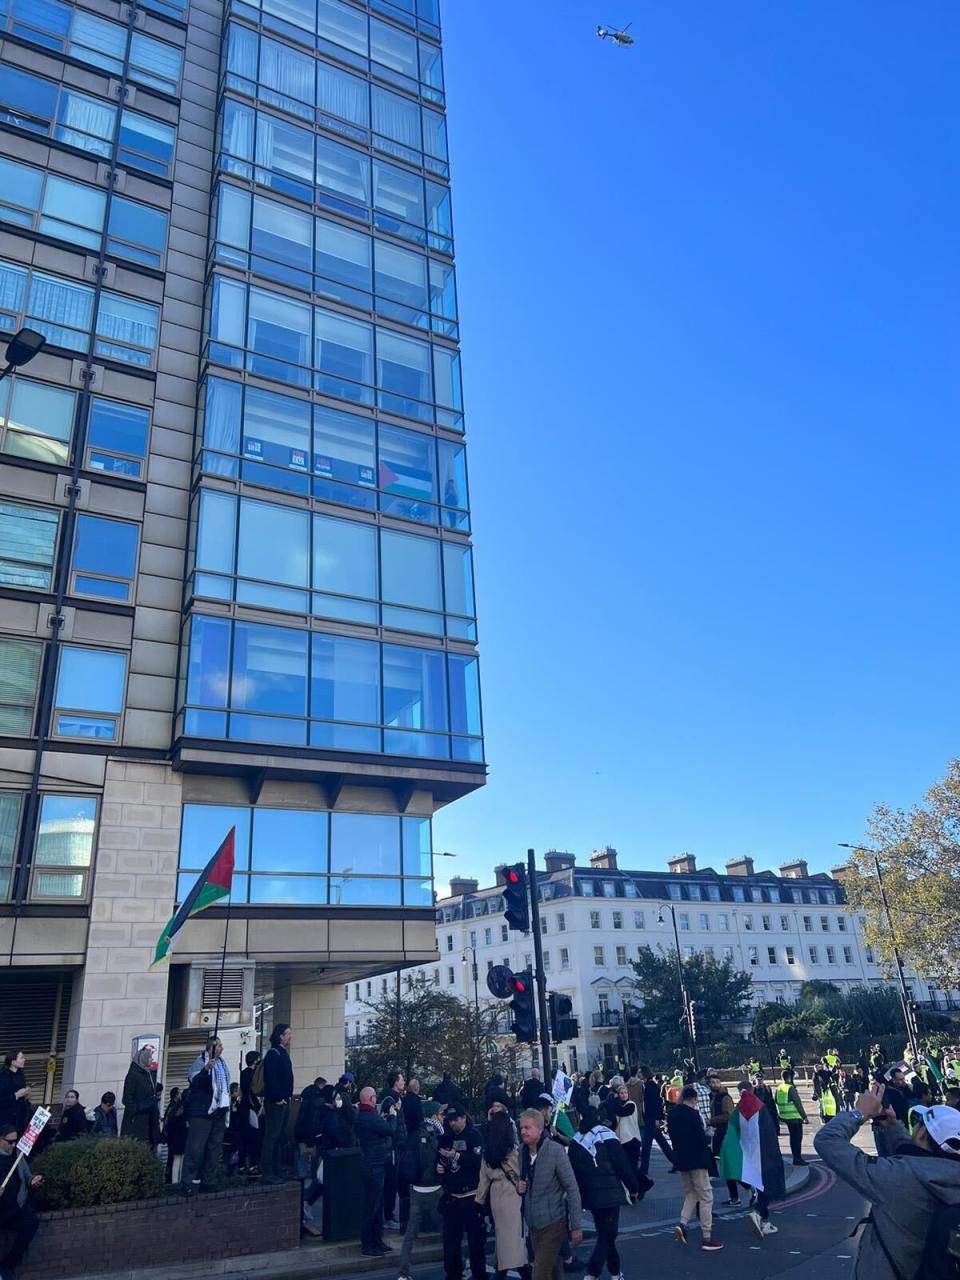 One man sits above the chaos championing a Palestine flag from his window (Provided)